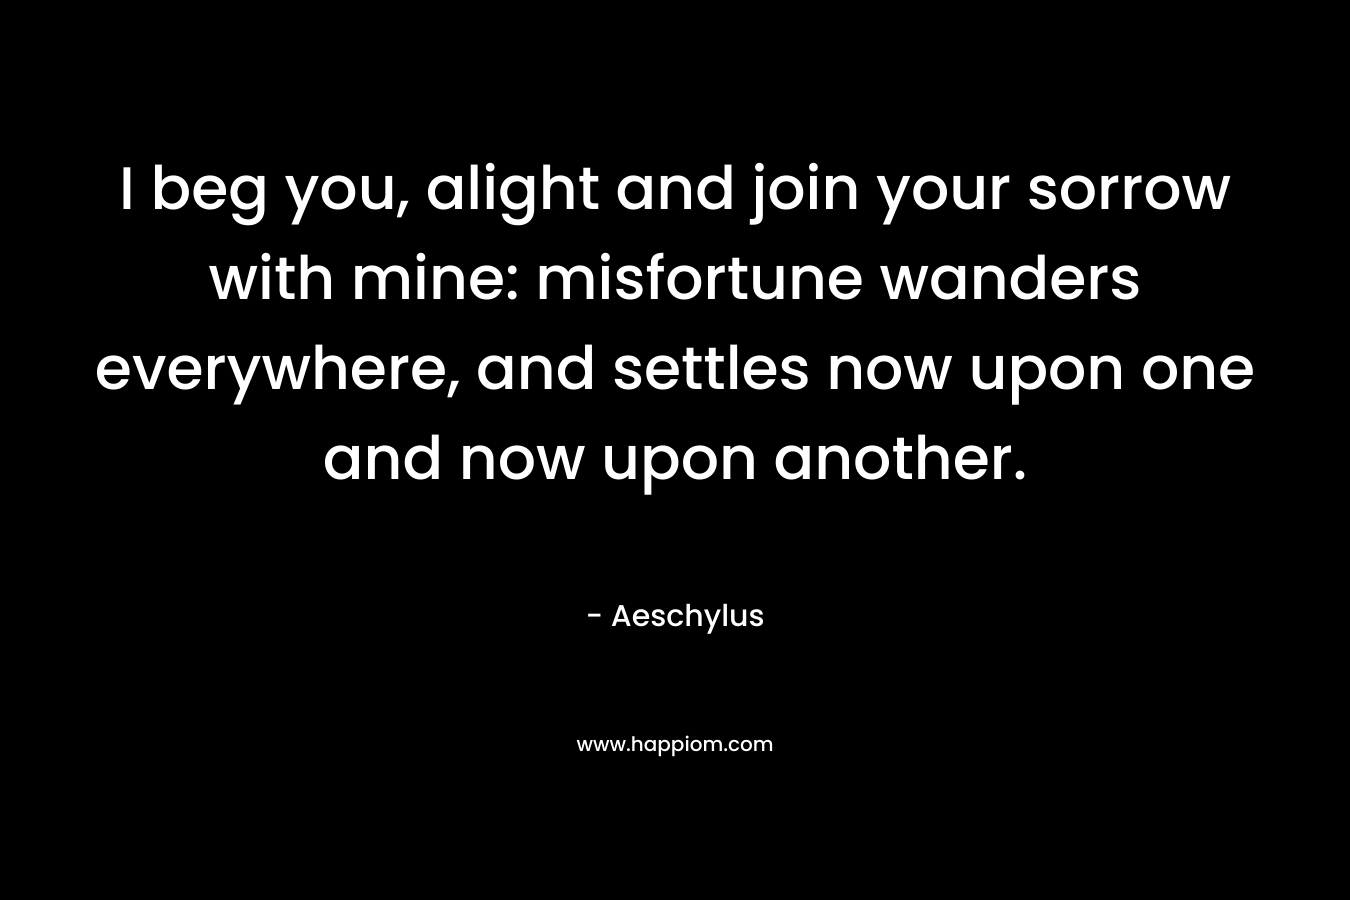 I beg you, alight and join your sorrow with mine: misfortune wanders everywhere, and settles now upon one and now upon another. – Aeschylus